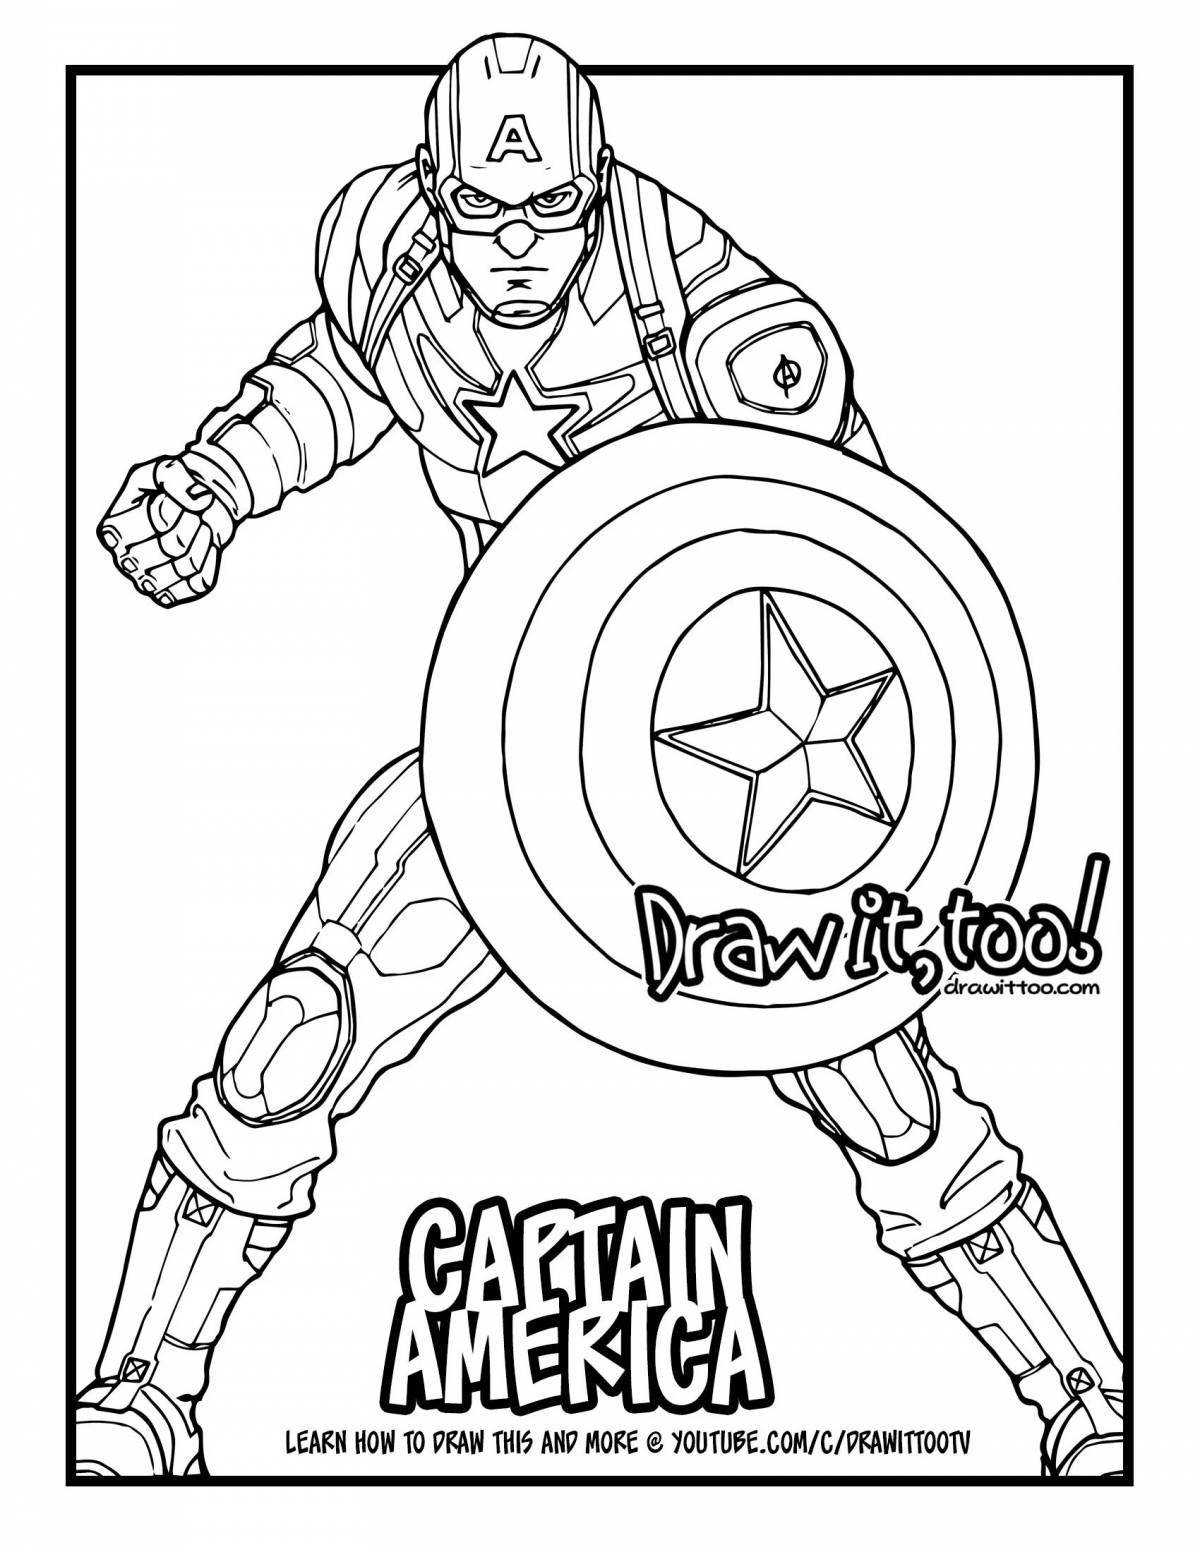 Colorful Spider-Man and Captain America coloring book